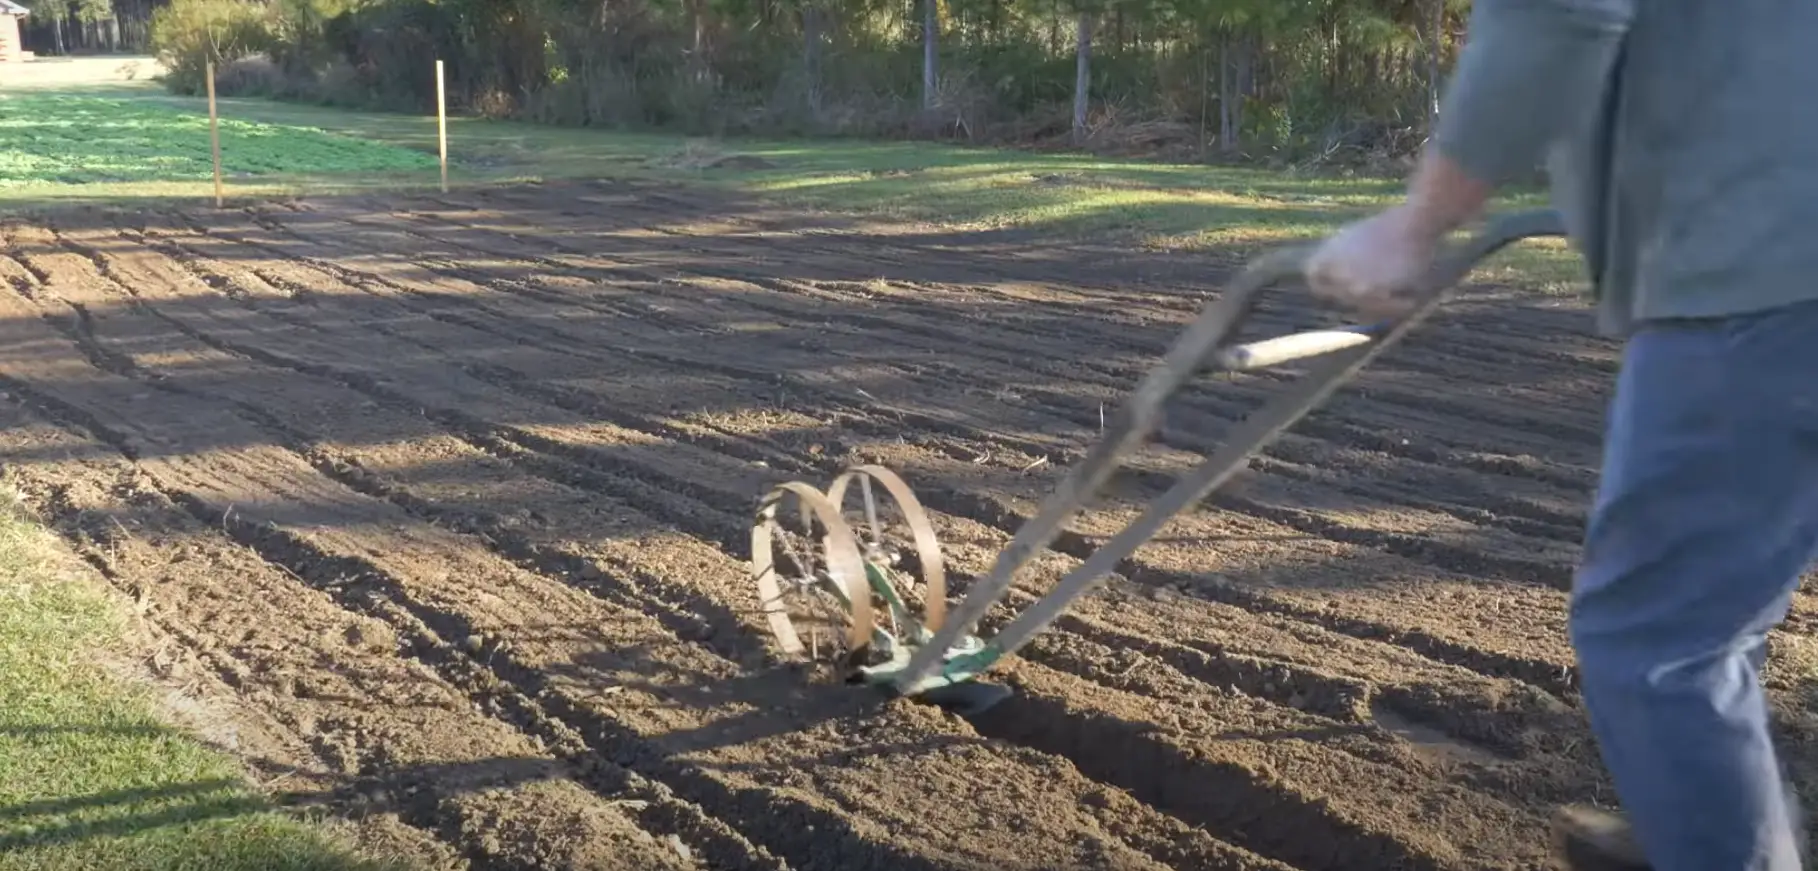 Pros and Cons of a Hoss Seeder